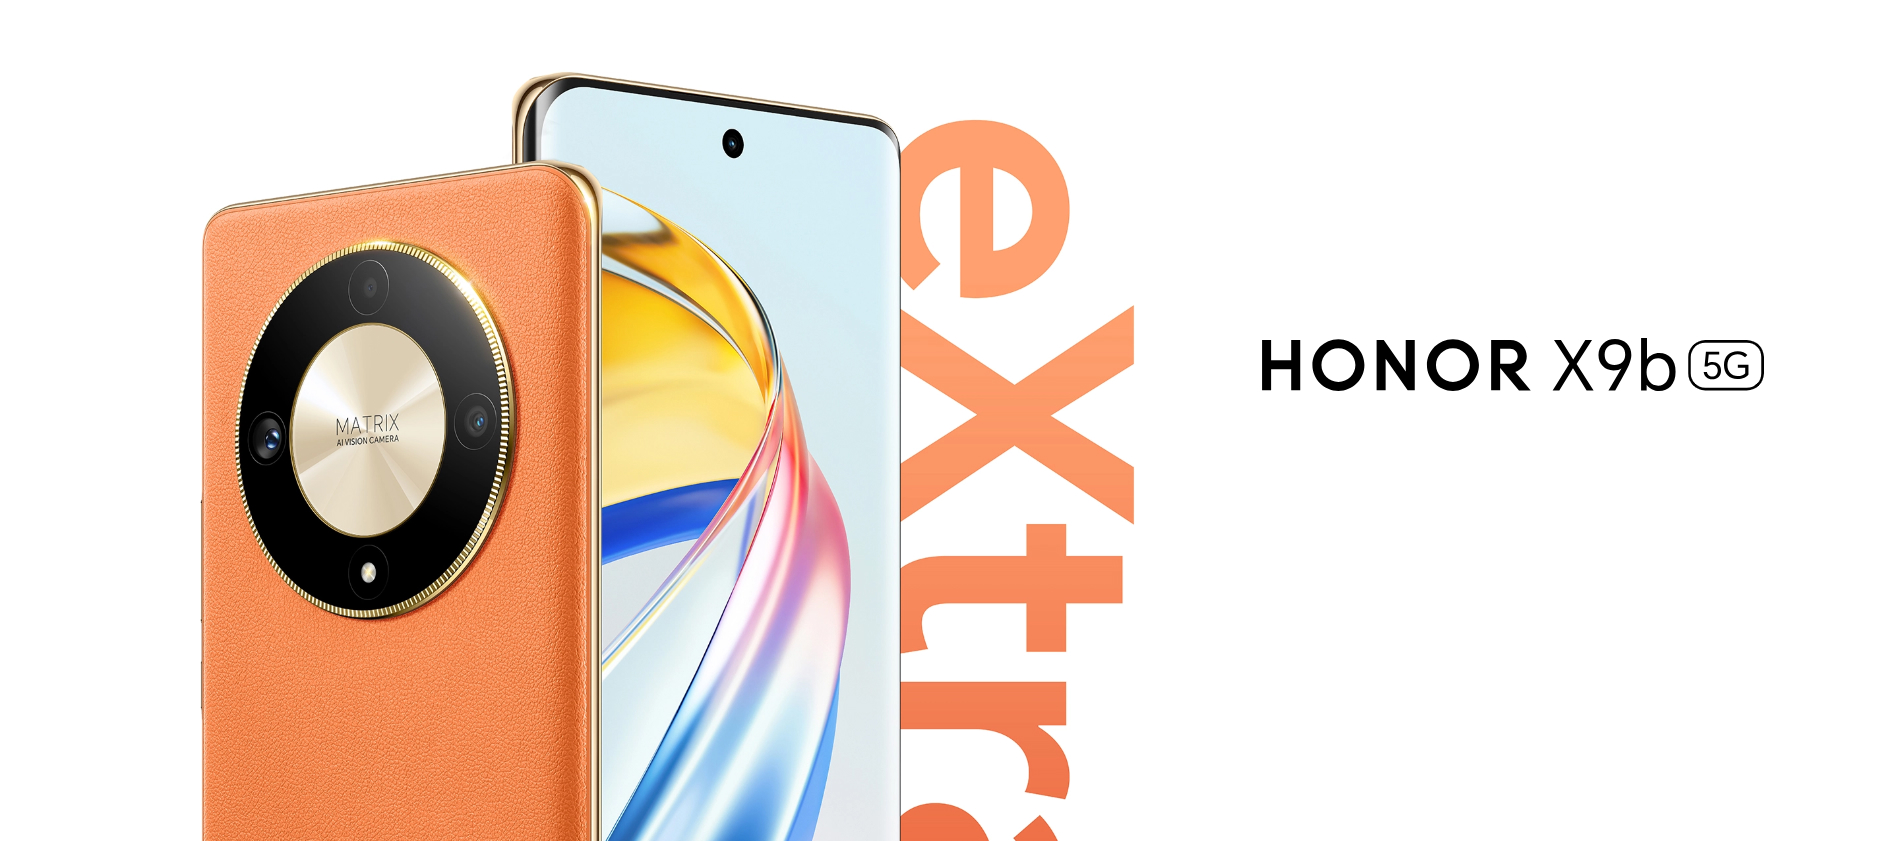 Honor X9b: Strong mid-range option with a solid build